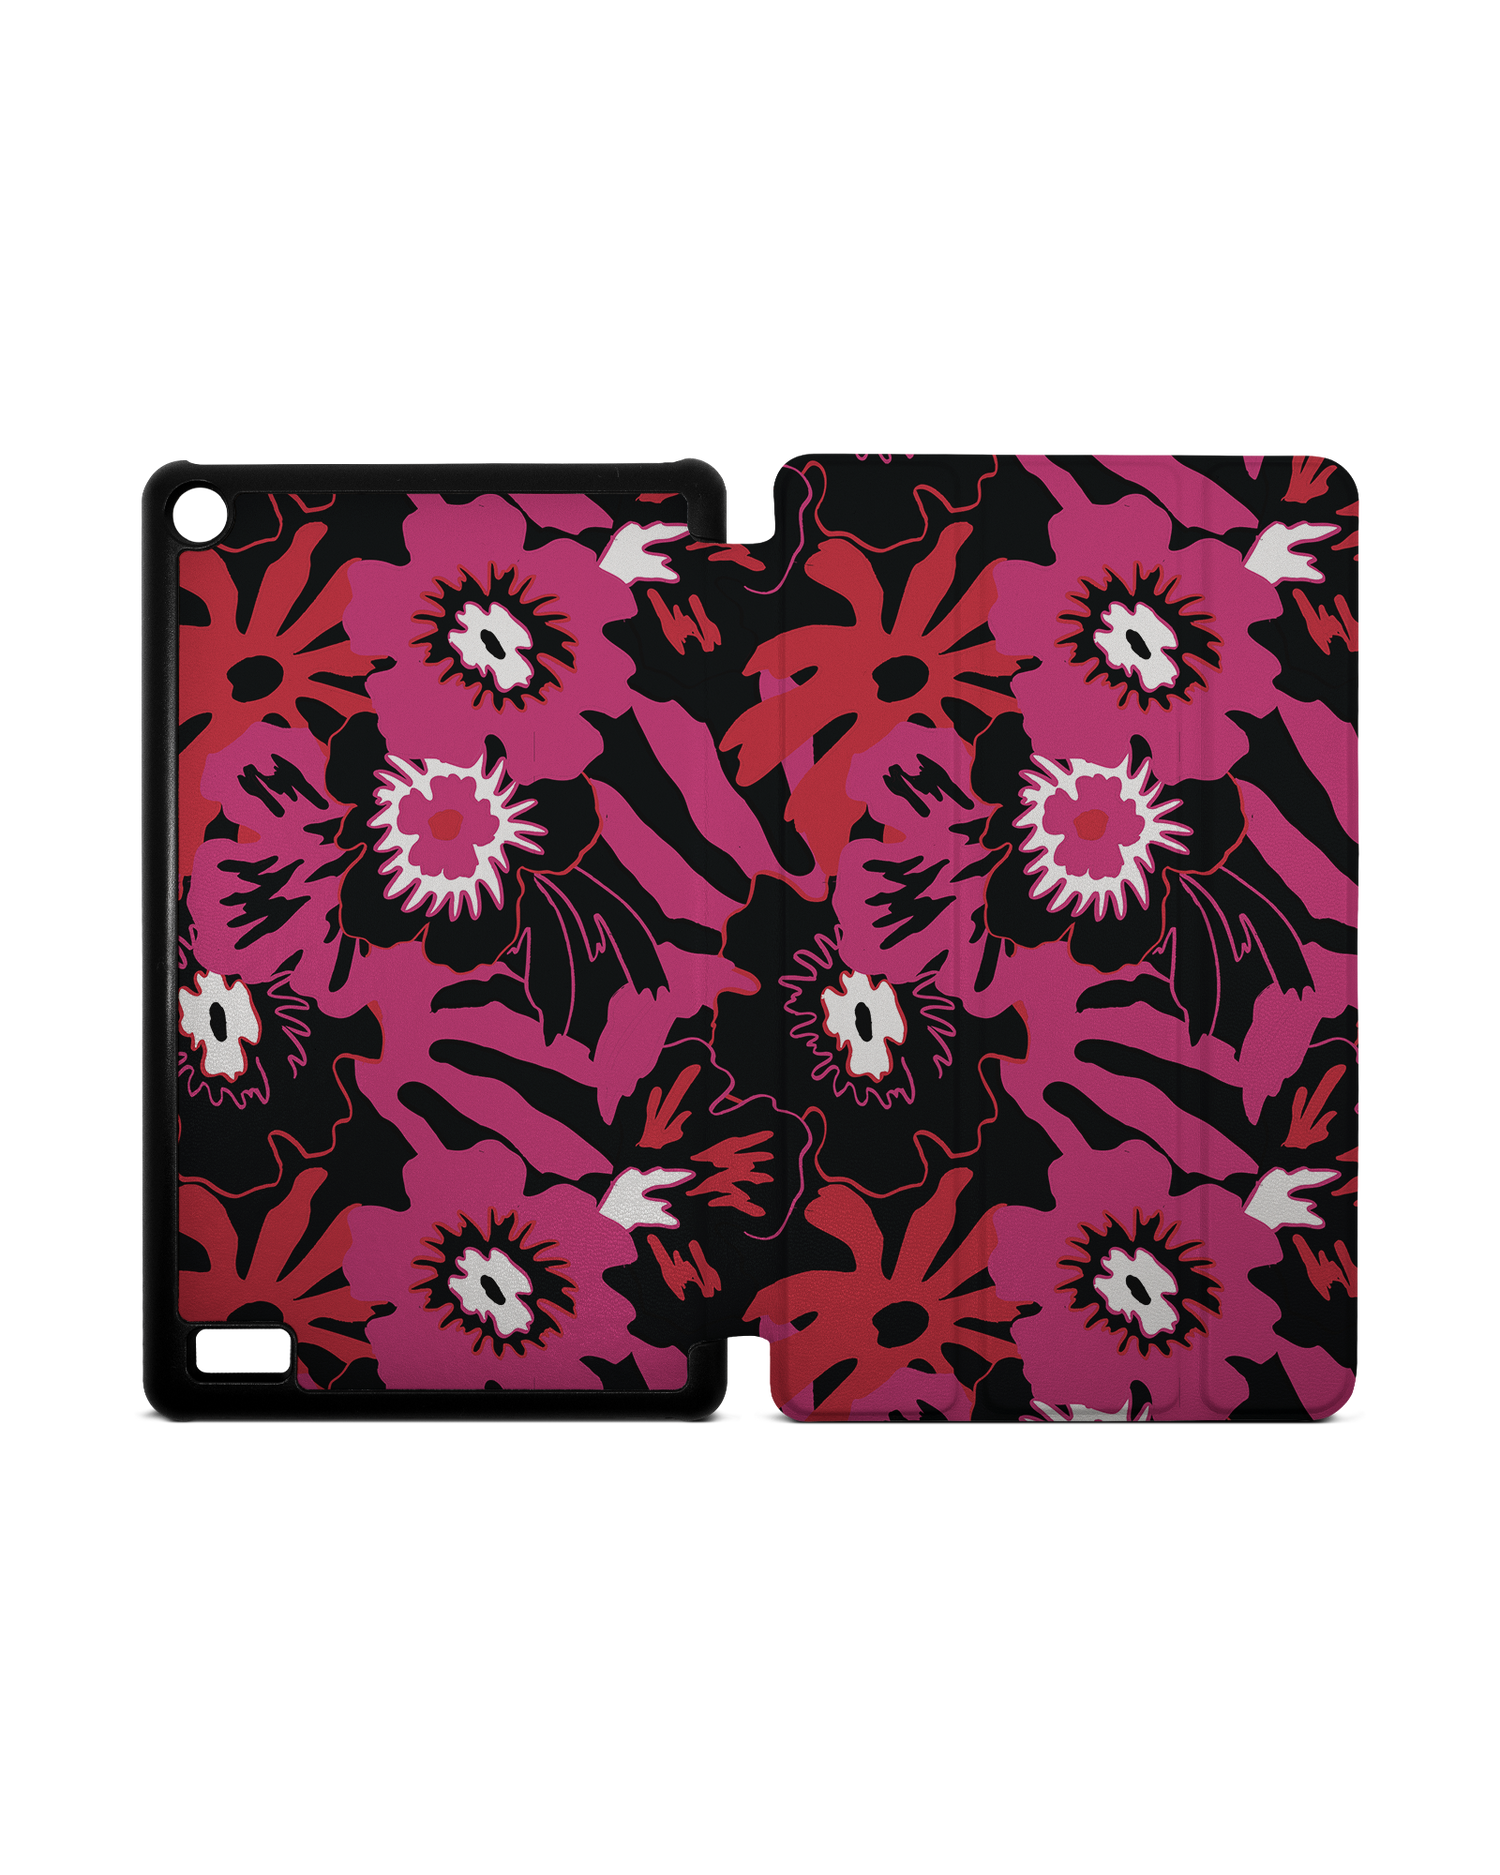 Flower Works Tablet Smart Case for Amazon Fire 7: Opened